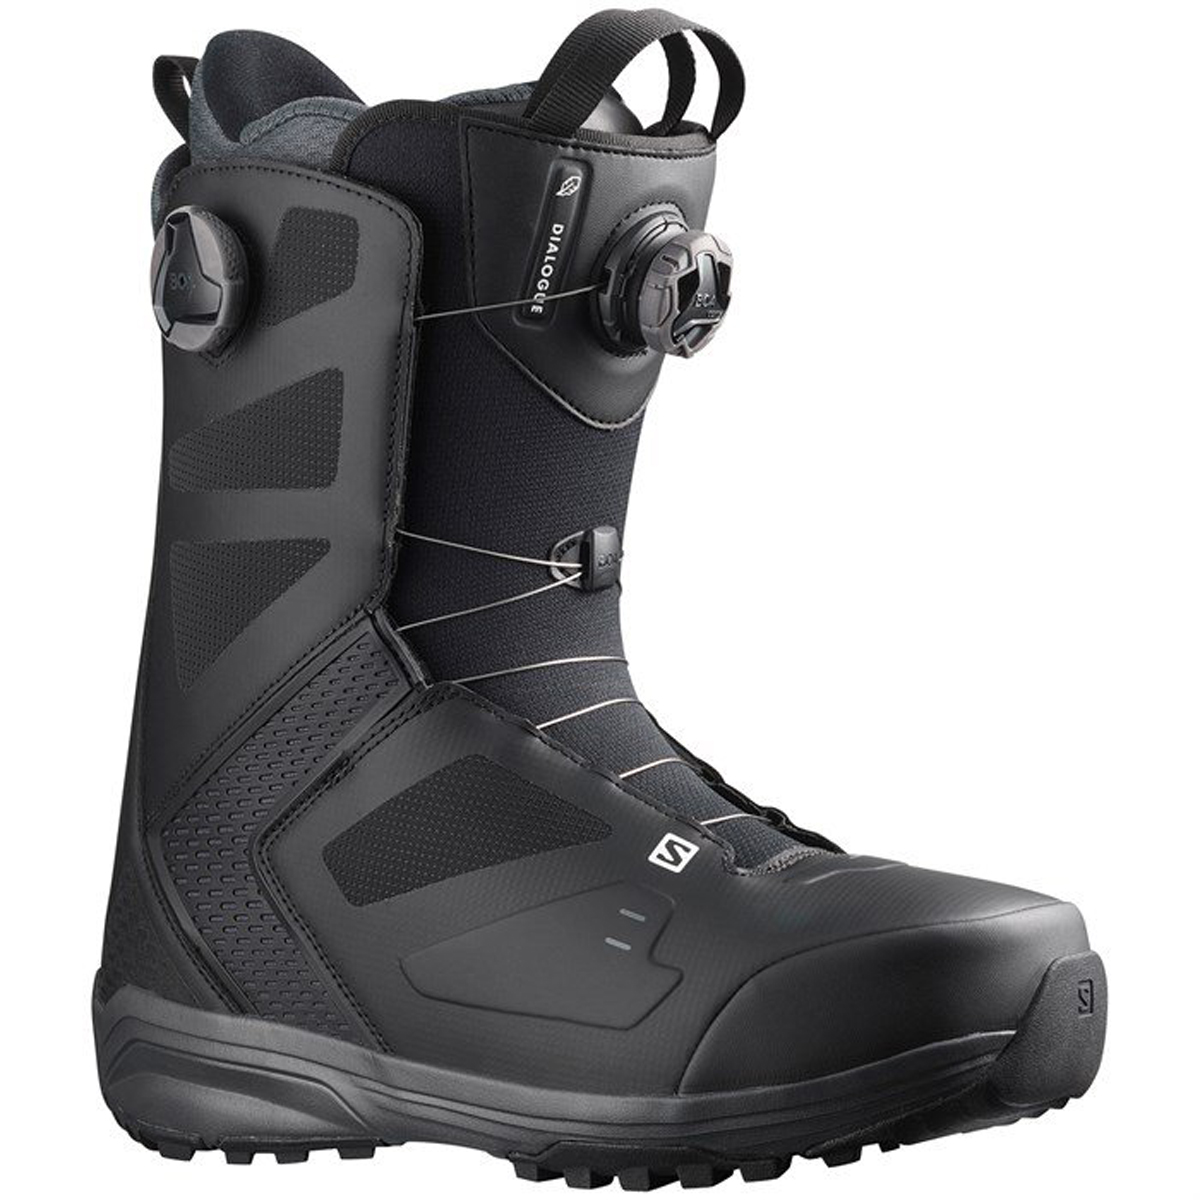 Men's Snowboard Boots for all styles and abilities